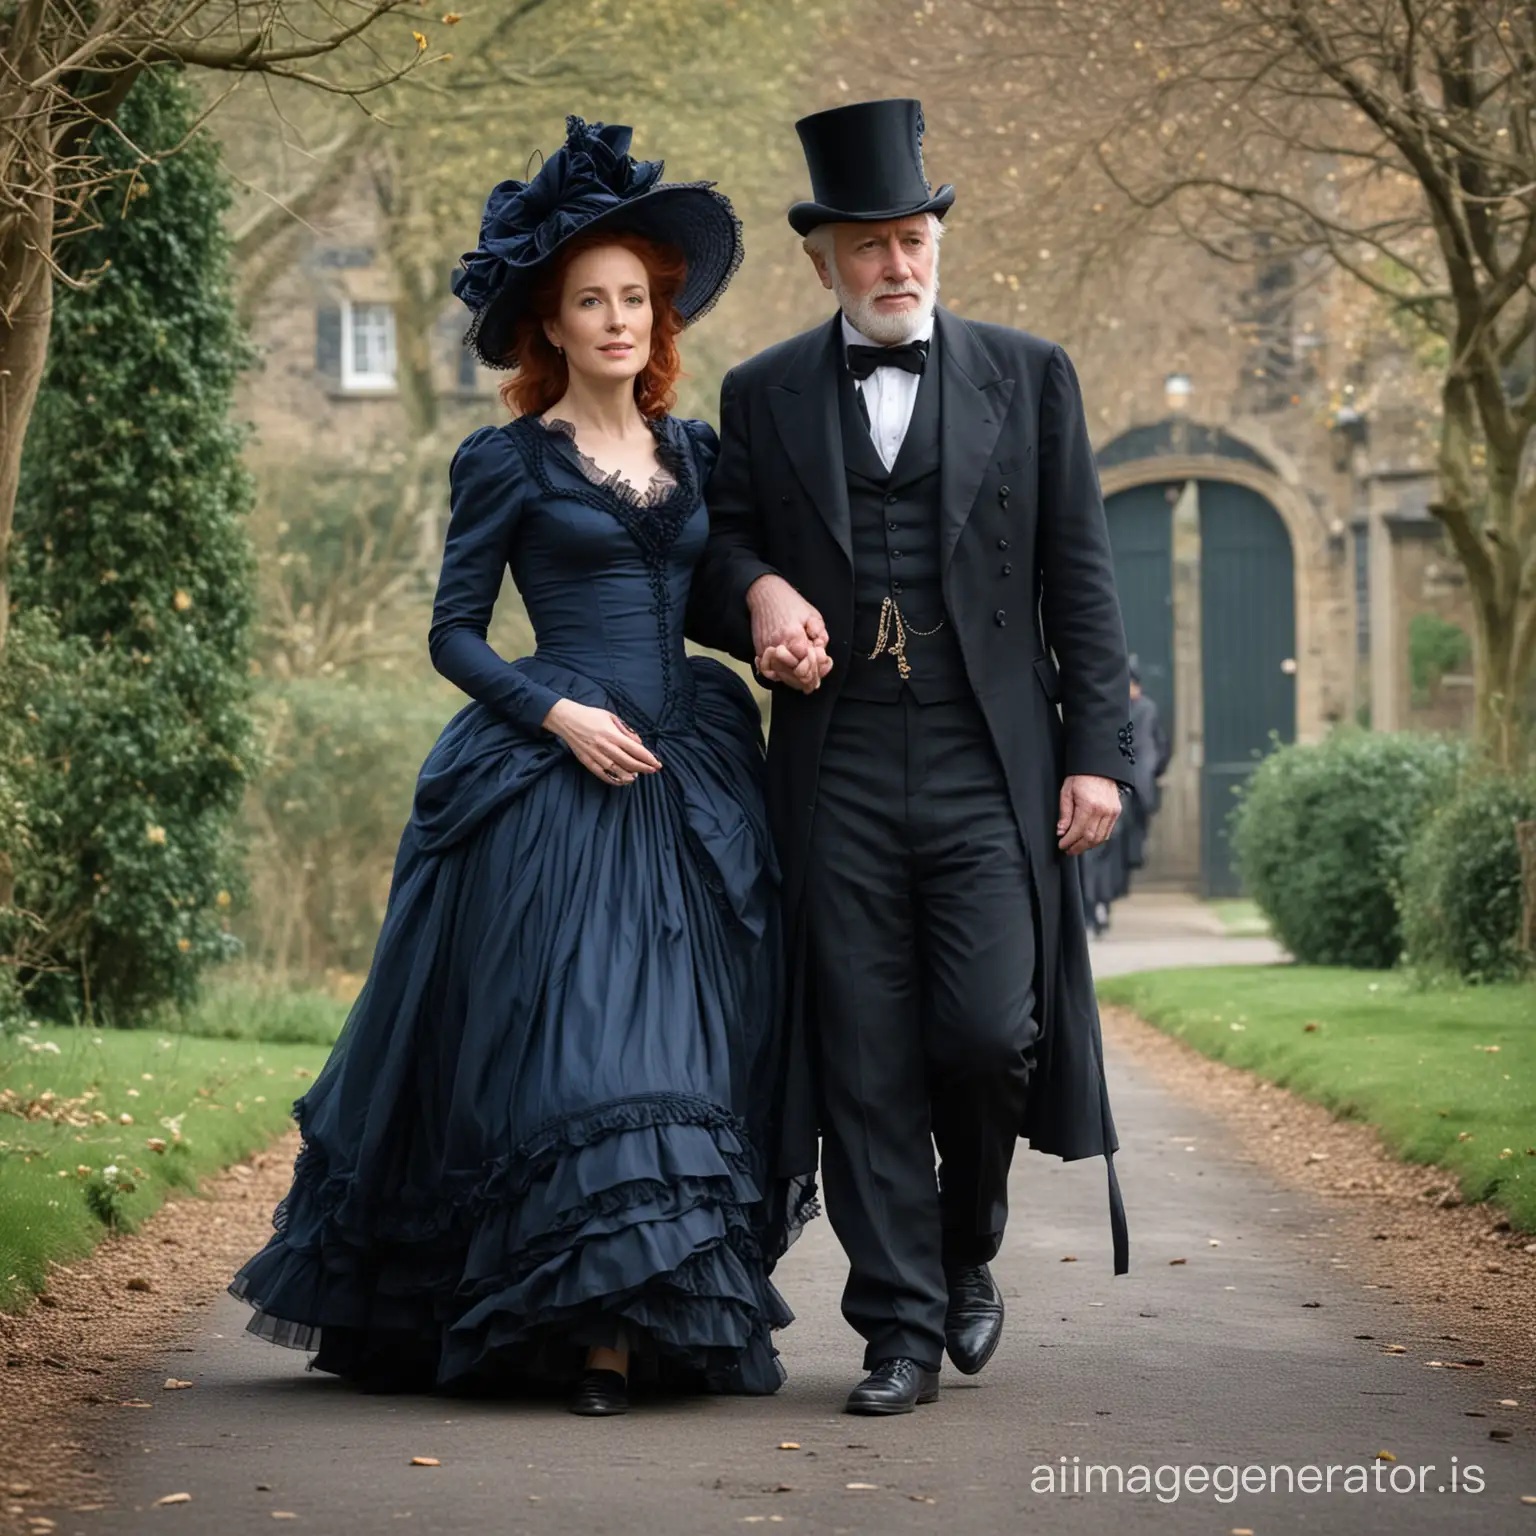 Victorian-Newlyweds-Stroll-RedHaired-Bride-in-Elegant-Dress-with-Her-Groom